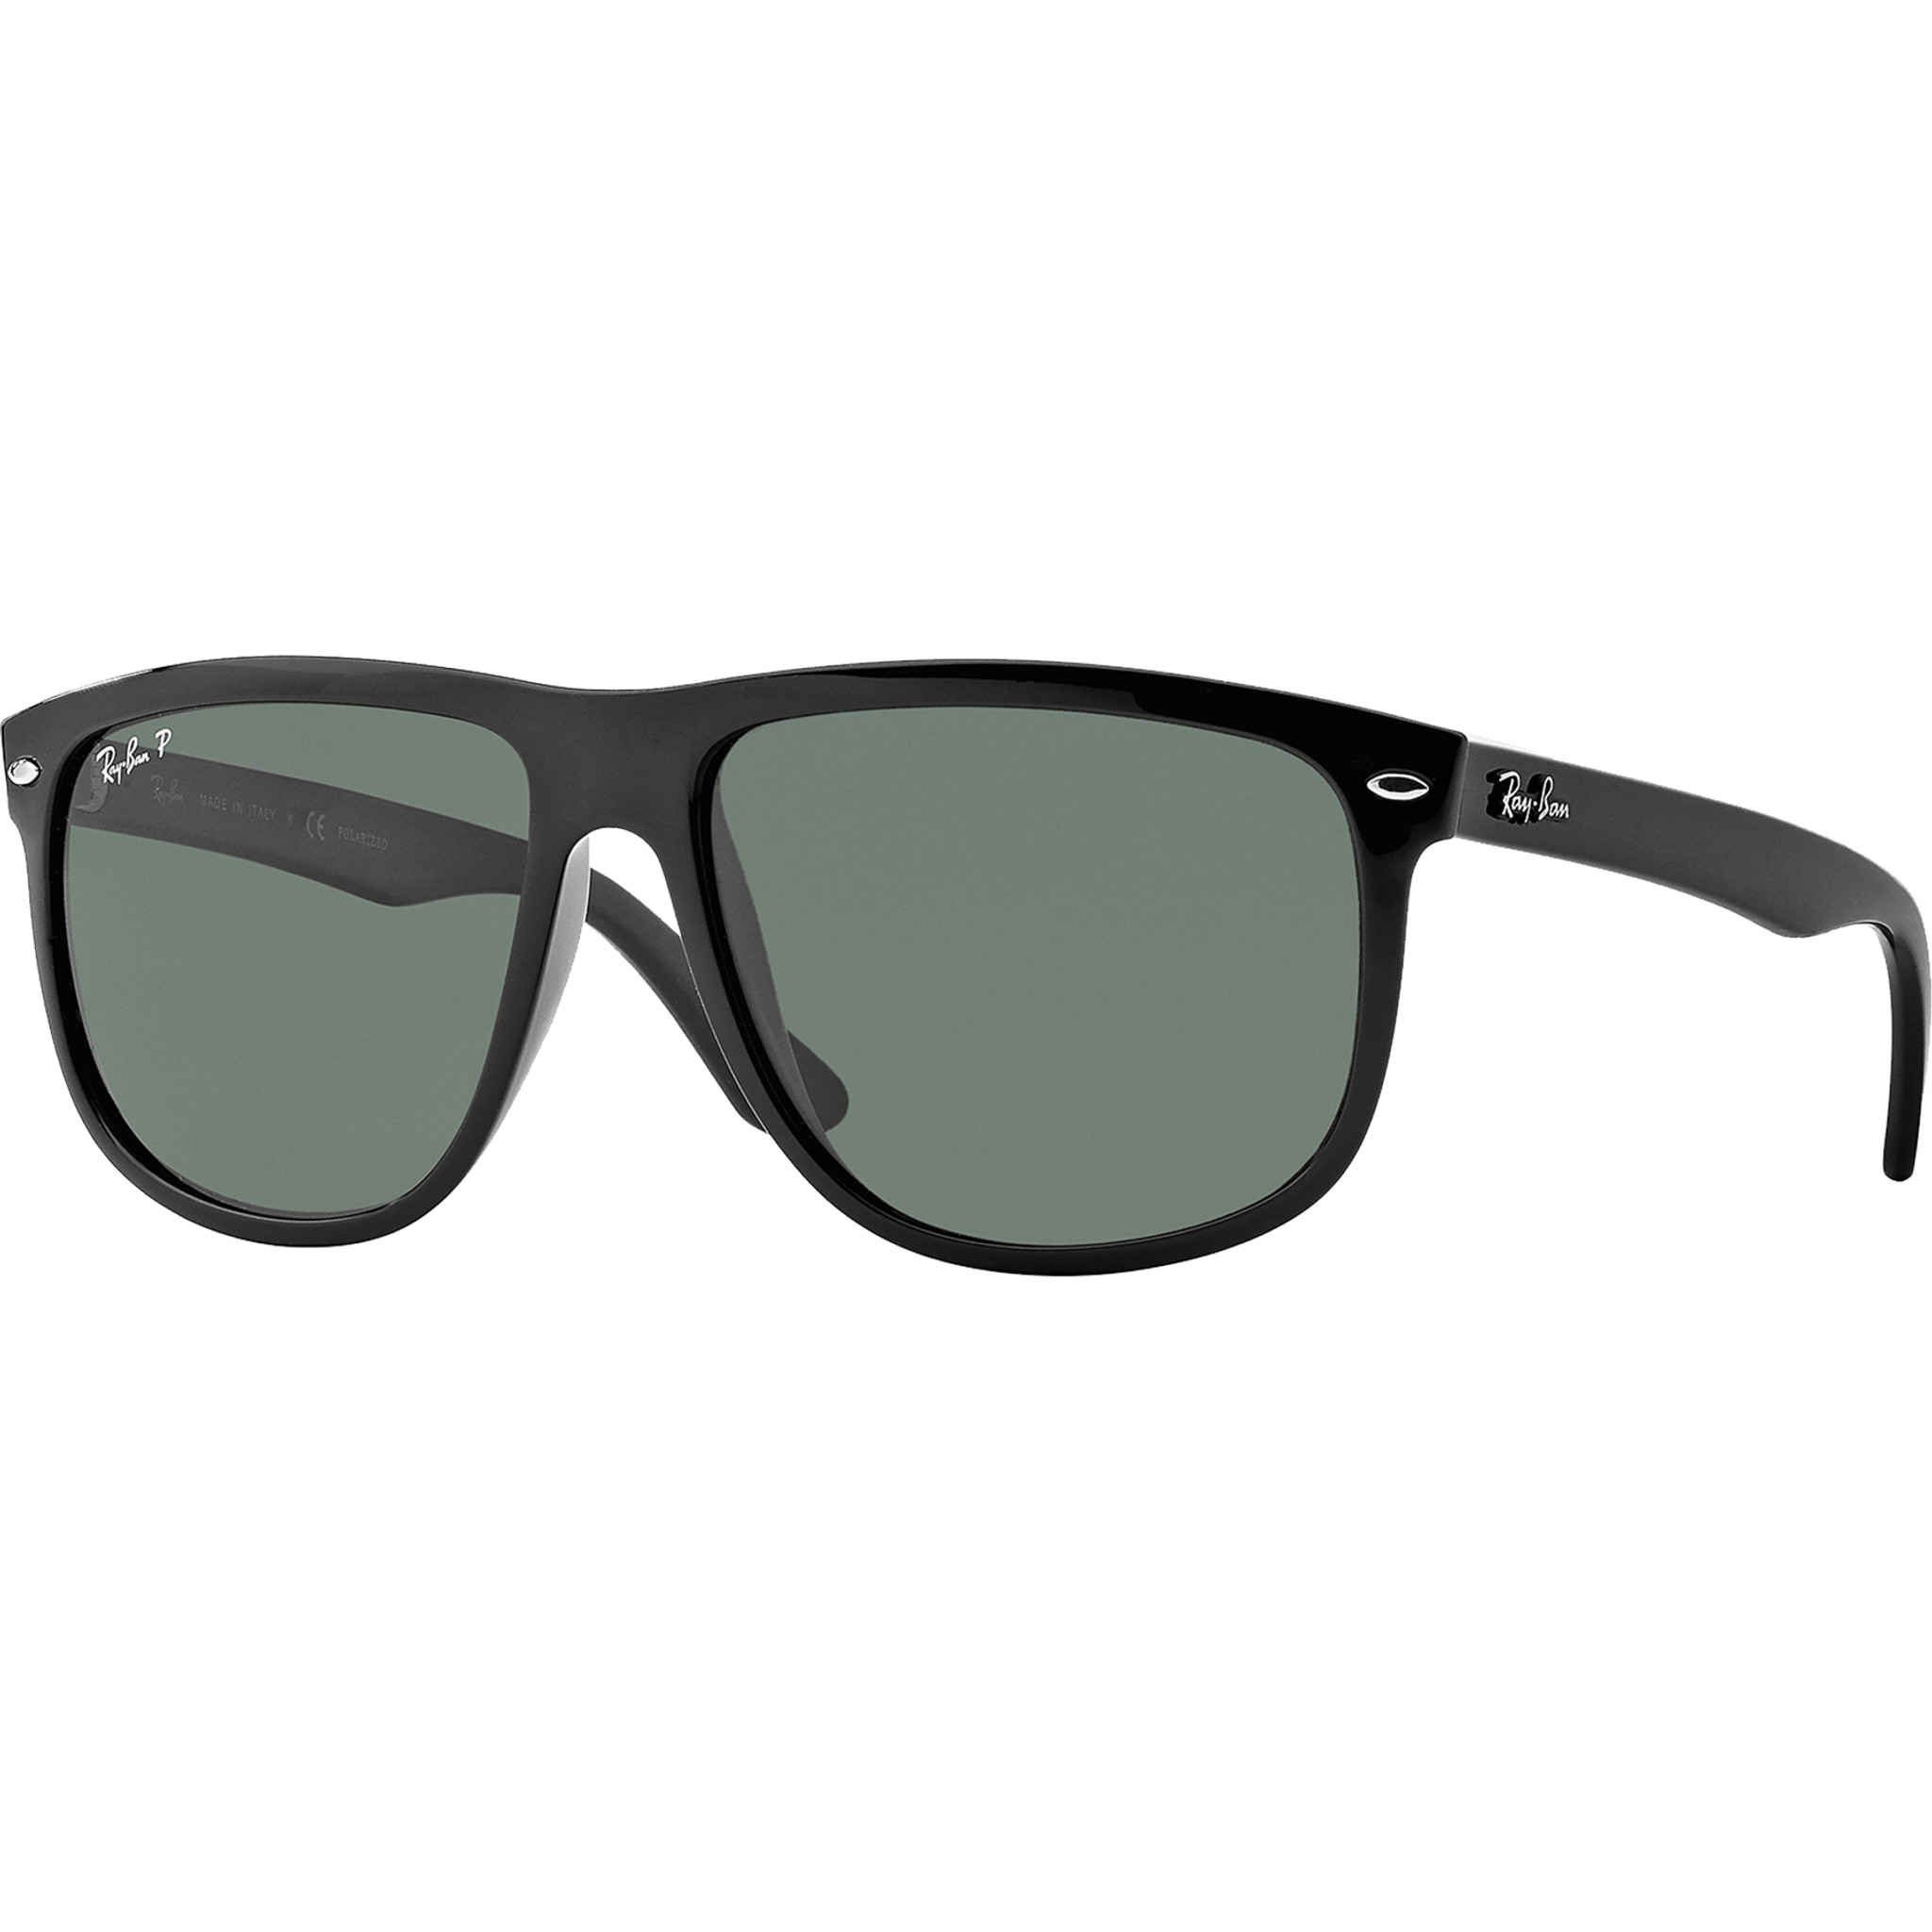 Promotional Branded Sunglasses Your Customers Will Want To Wear